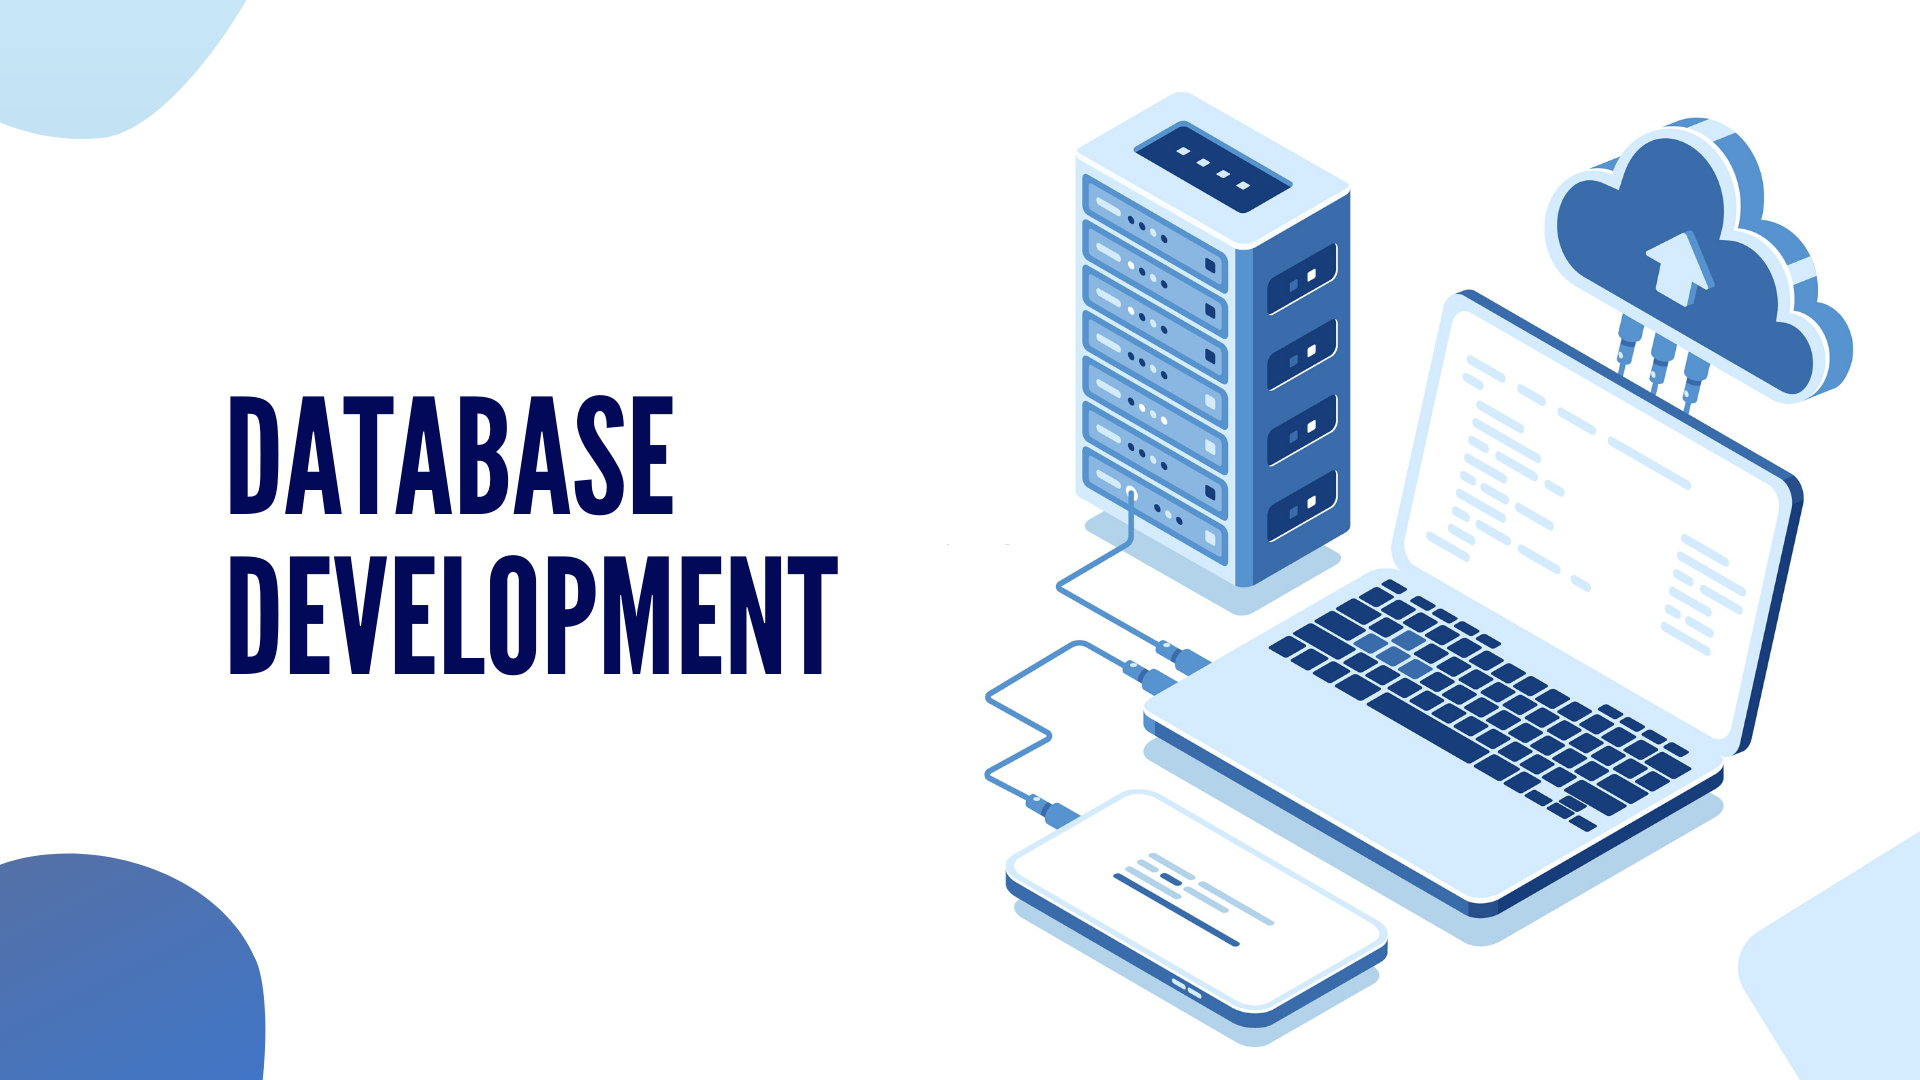 database design and development hnd assignment